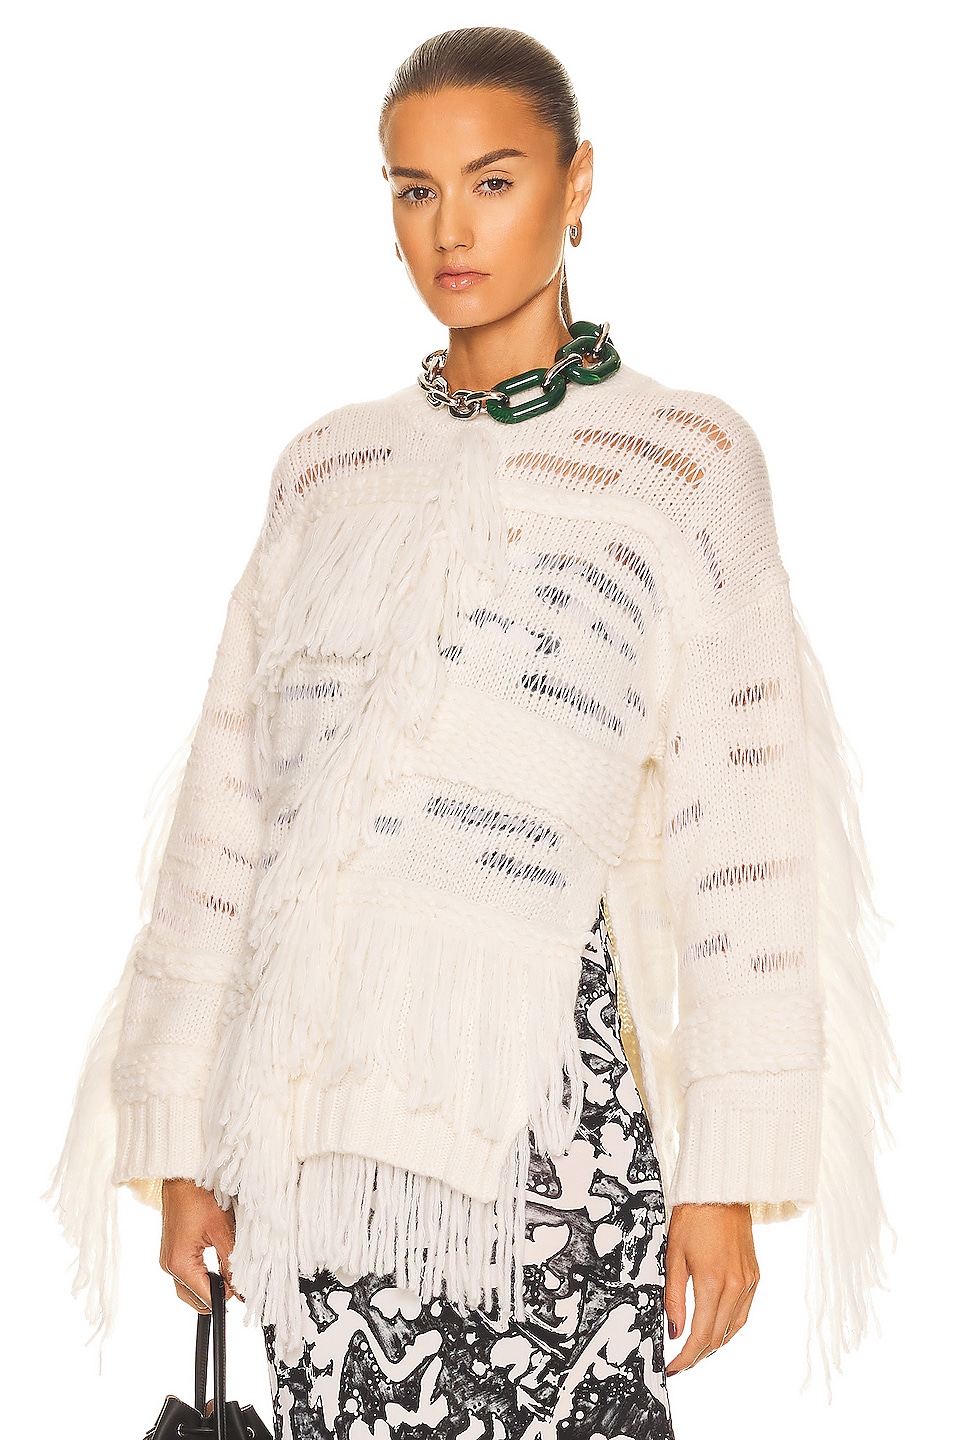 Stella McCartney Airy Texture Sweater in Natural | FWRD